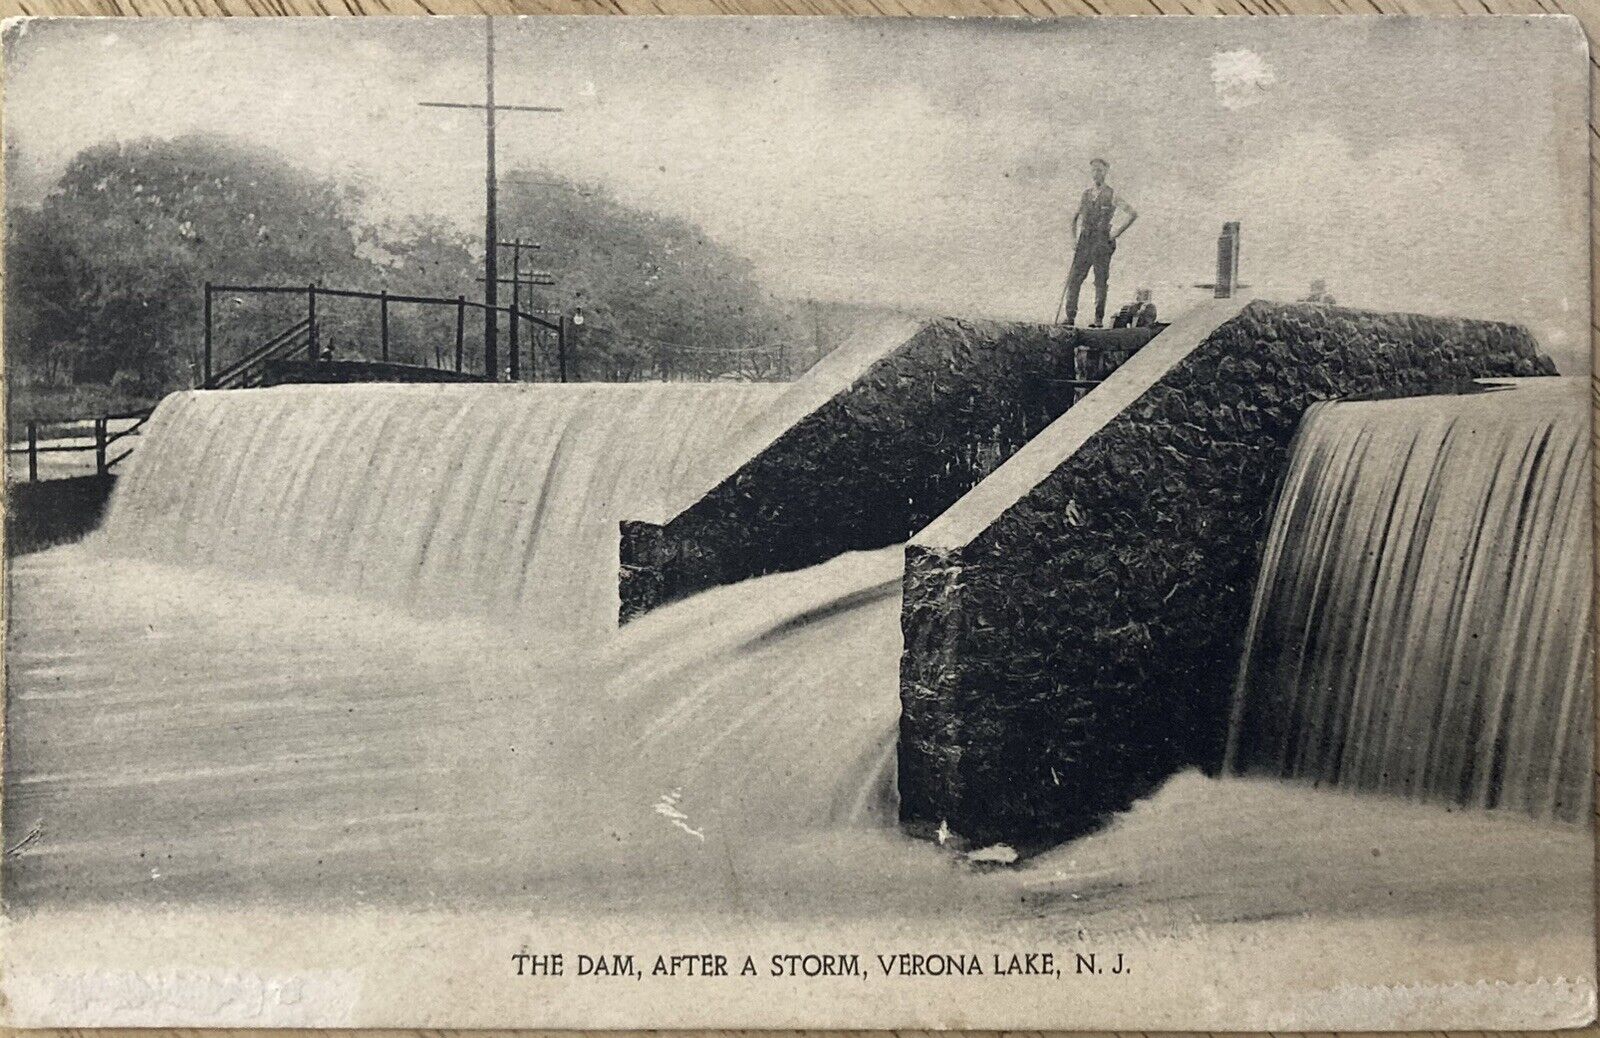 VERONA LAKE, NJ. C.1906 P.C.(A68)~VIEW OF MAN STANDING ON DAM AFTER A STORM